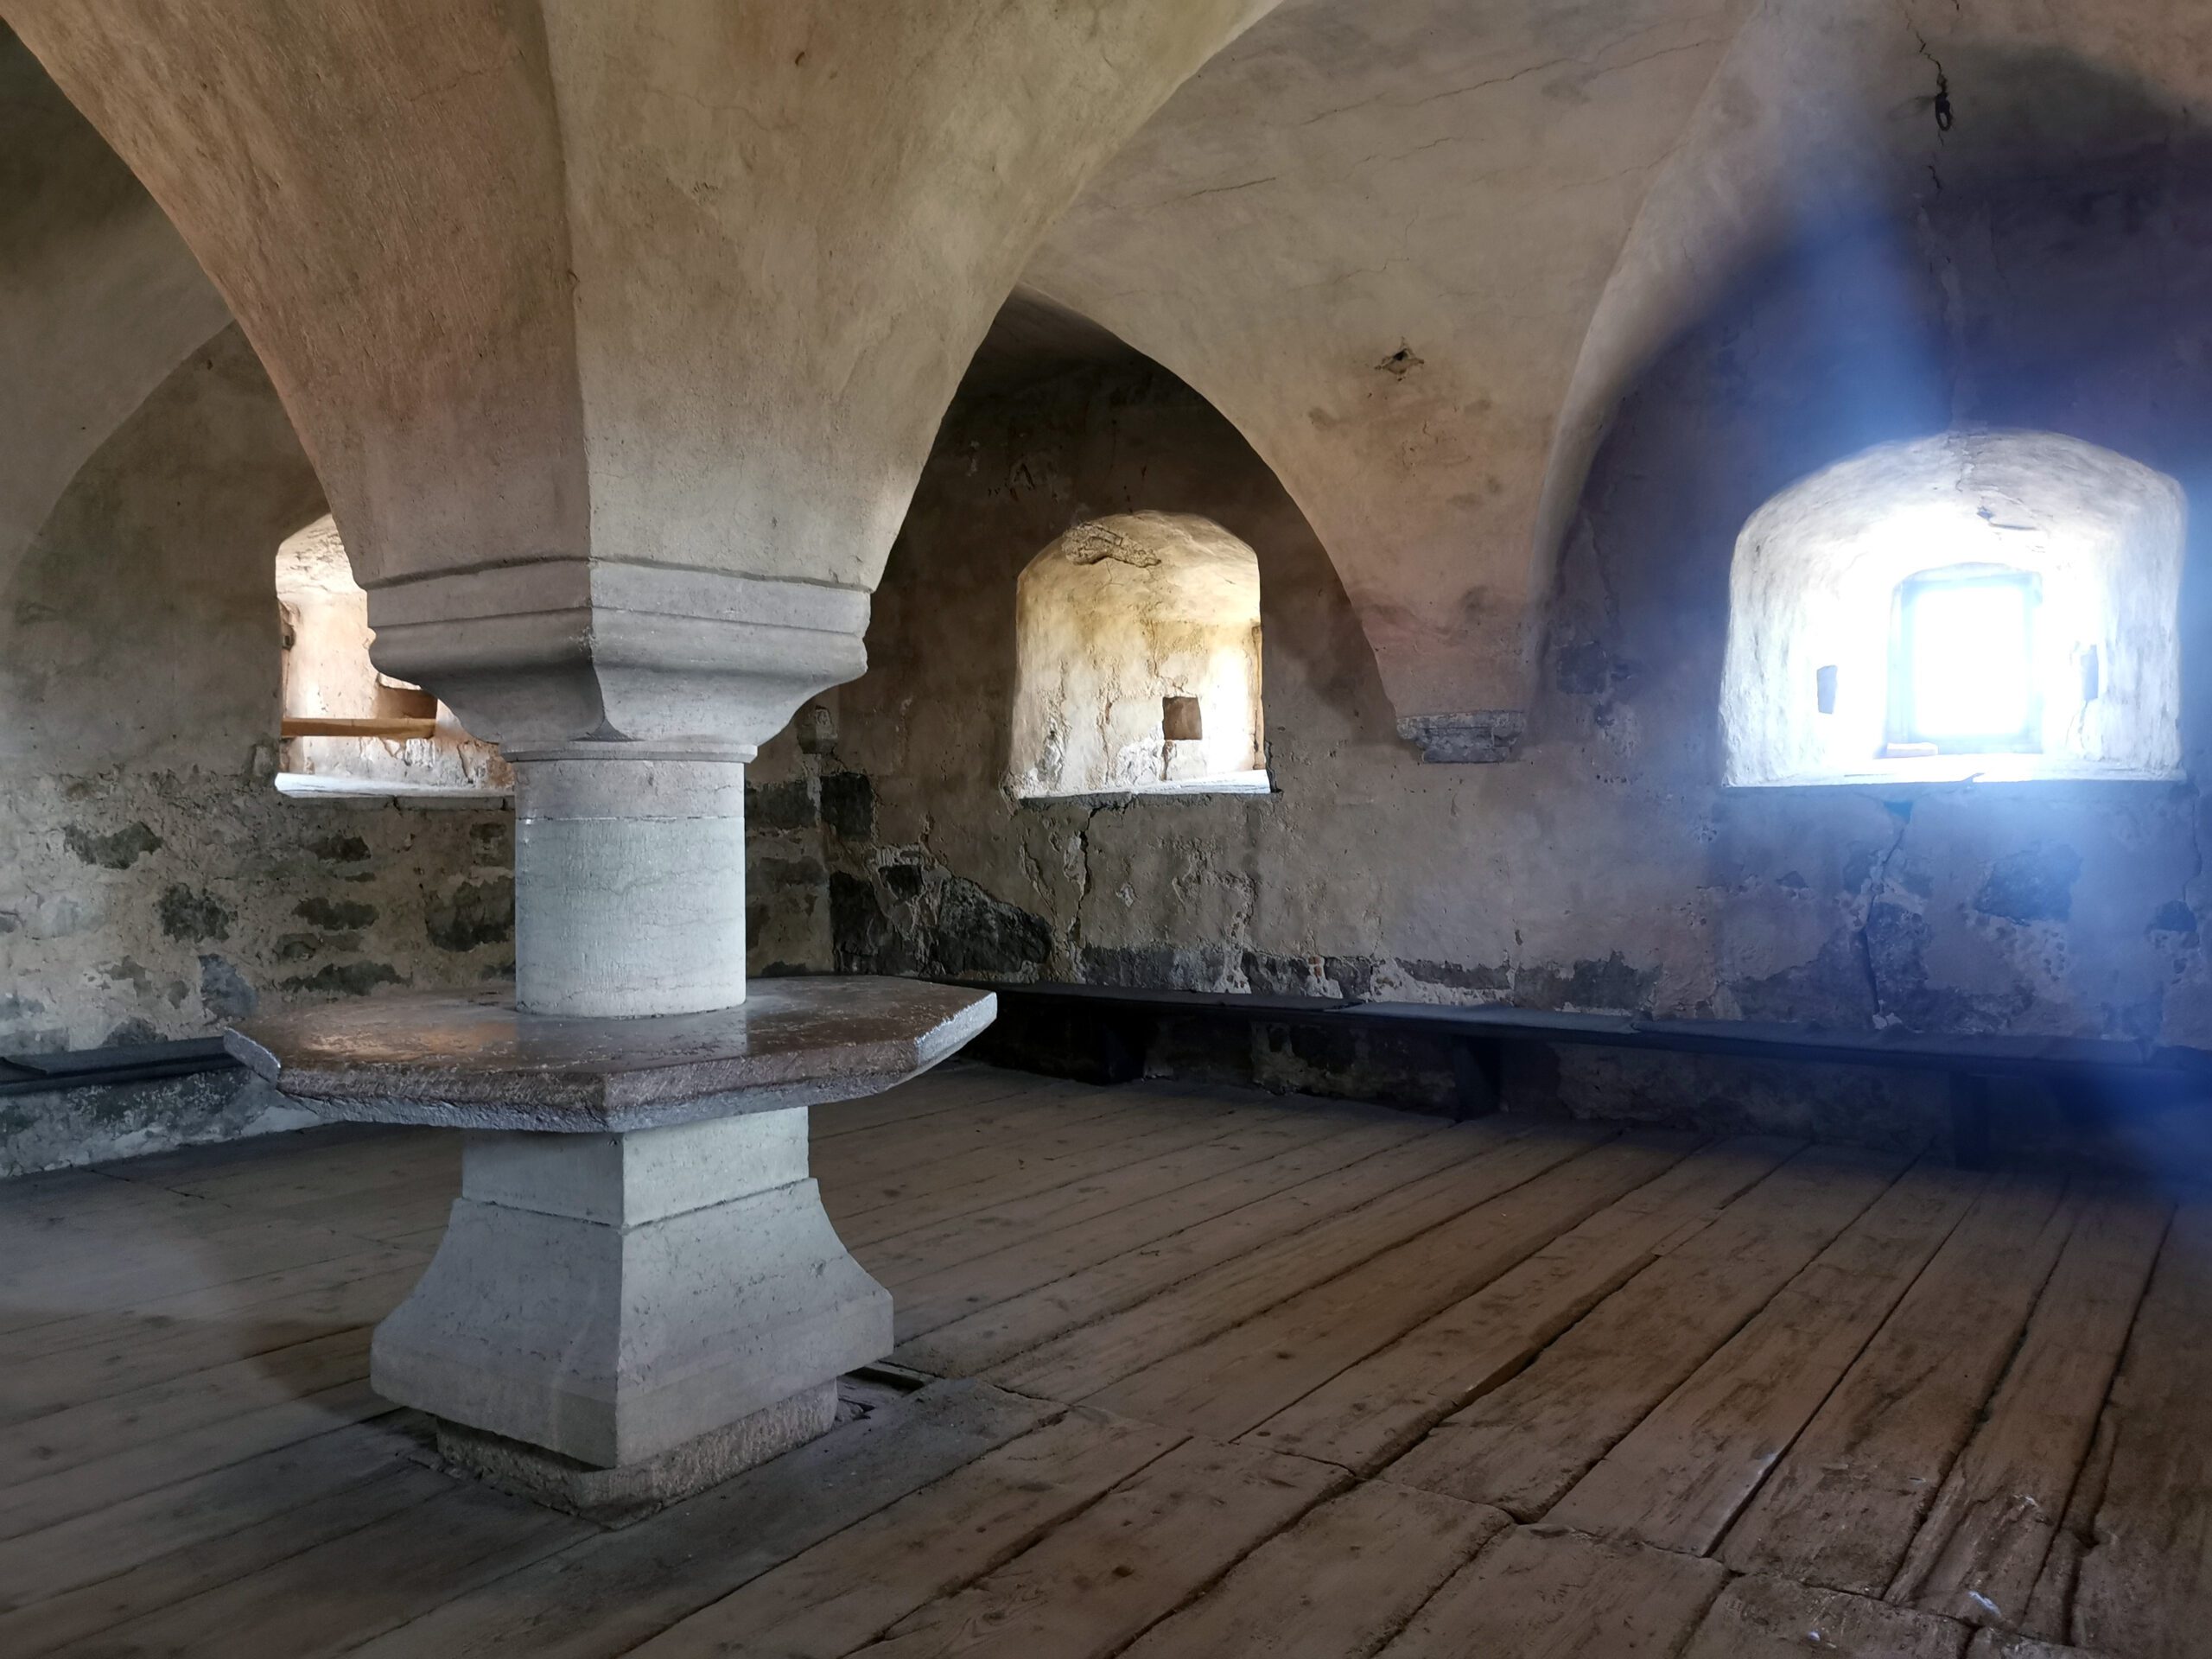 A room with a vaulted ceiling and rough wooden floorboards. In the middle, the vault descends into a pillar with an octagonal table top around it. Fixed benches around the walls and deep window niches.